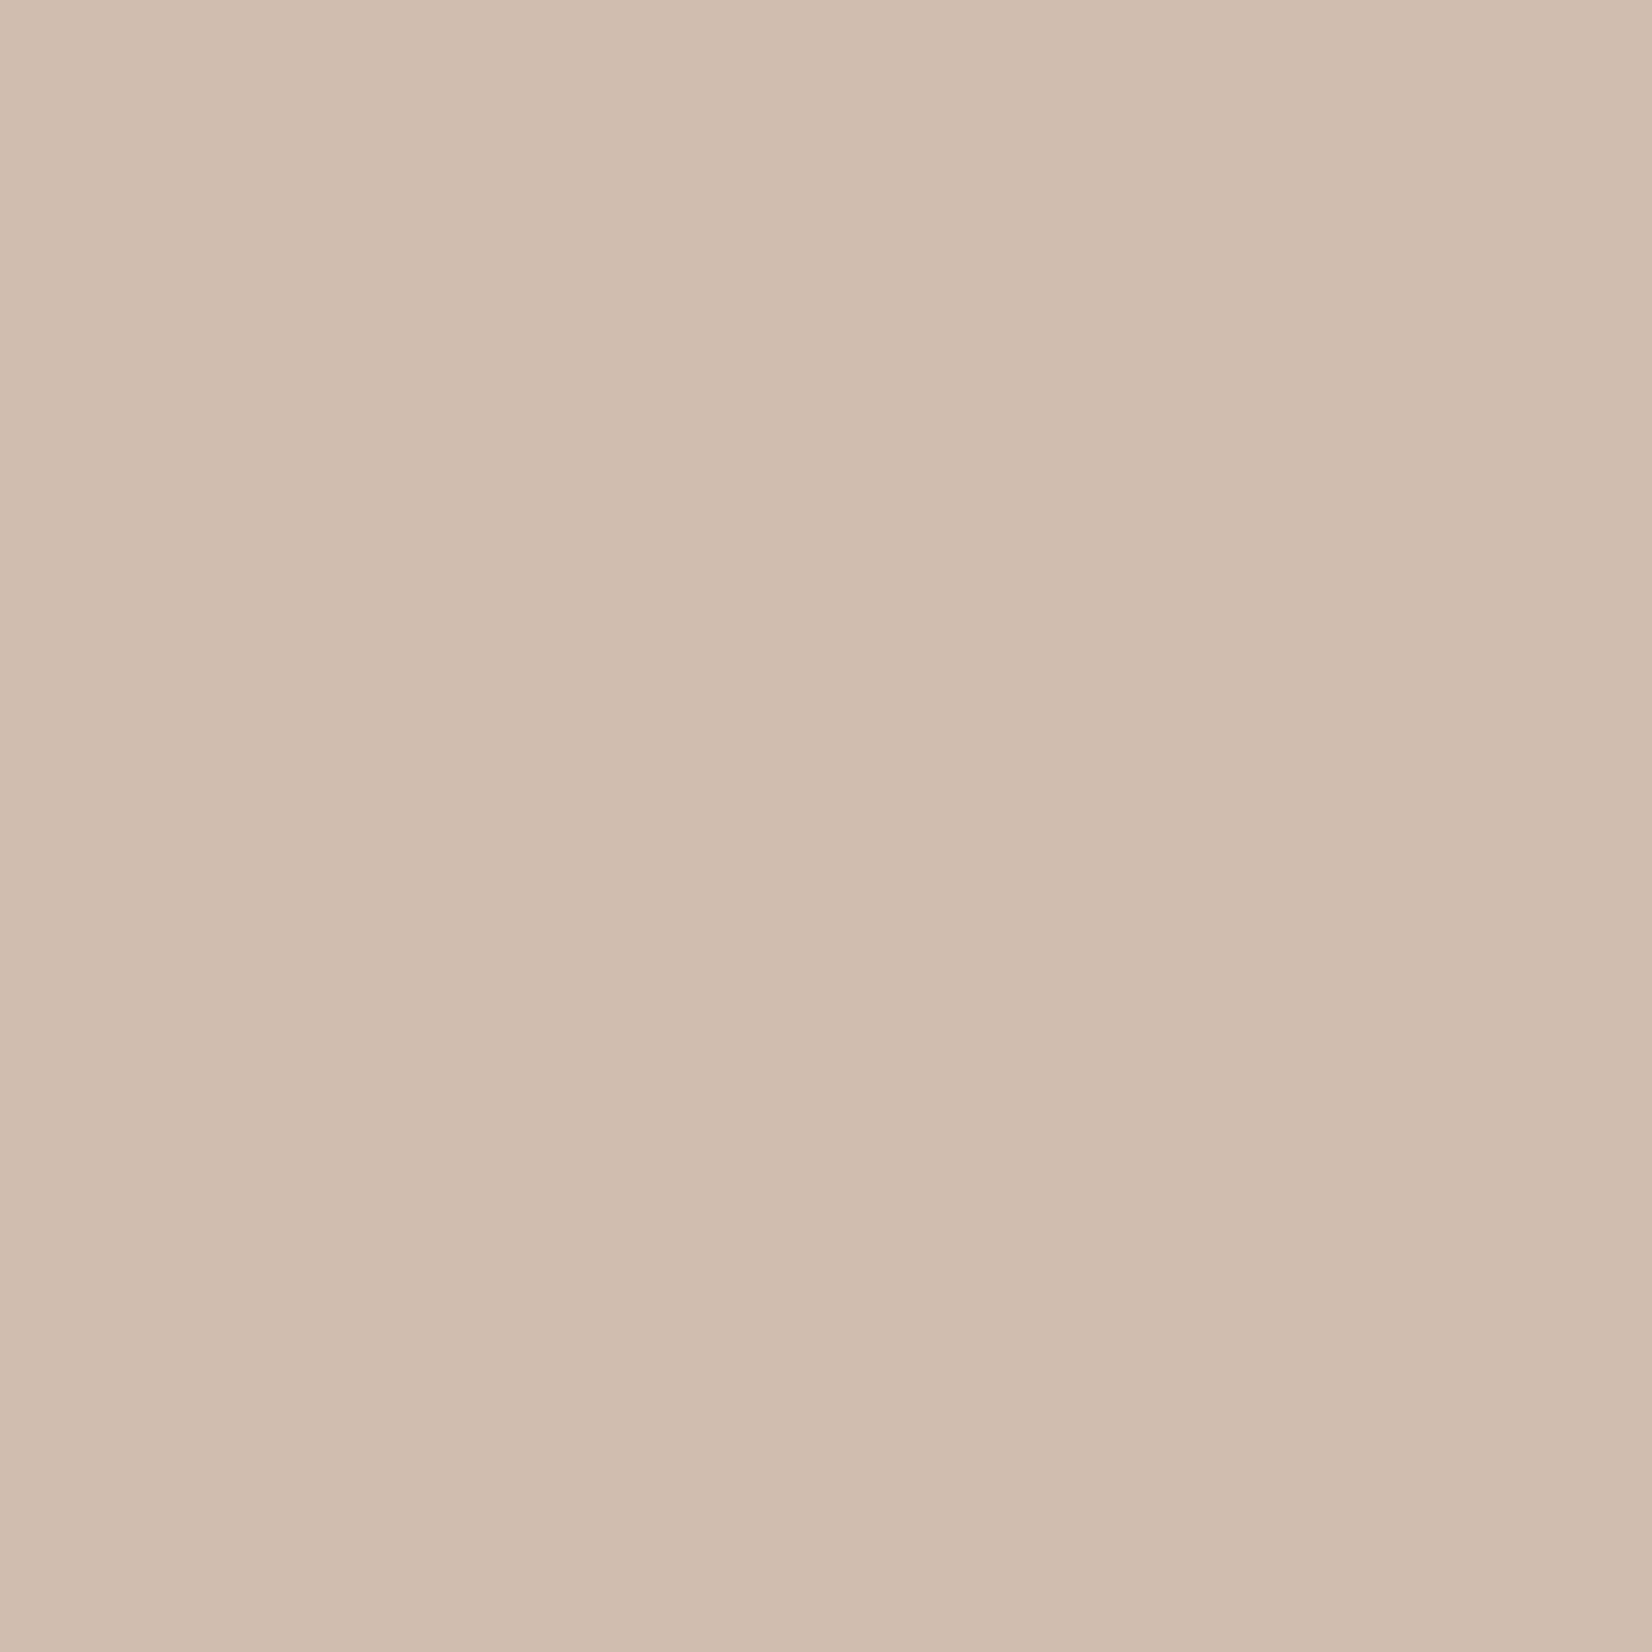 PRISMACOLOR CHISEL MARKER PM158 FRENCH GRAY 40% (FINAL SALE) (TBD)